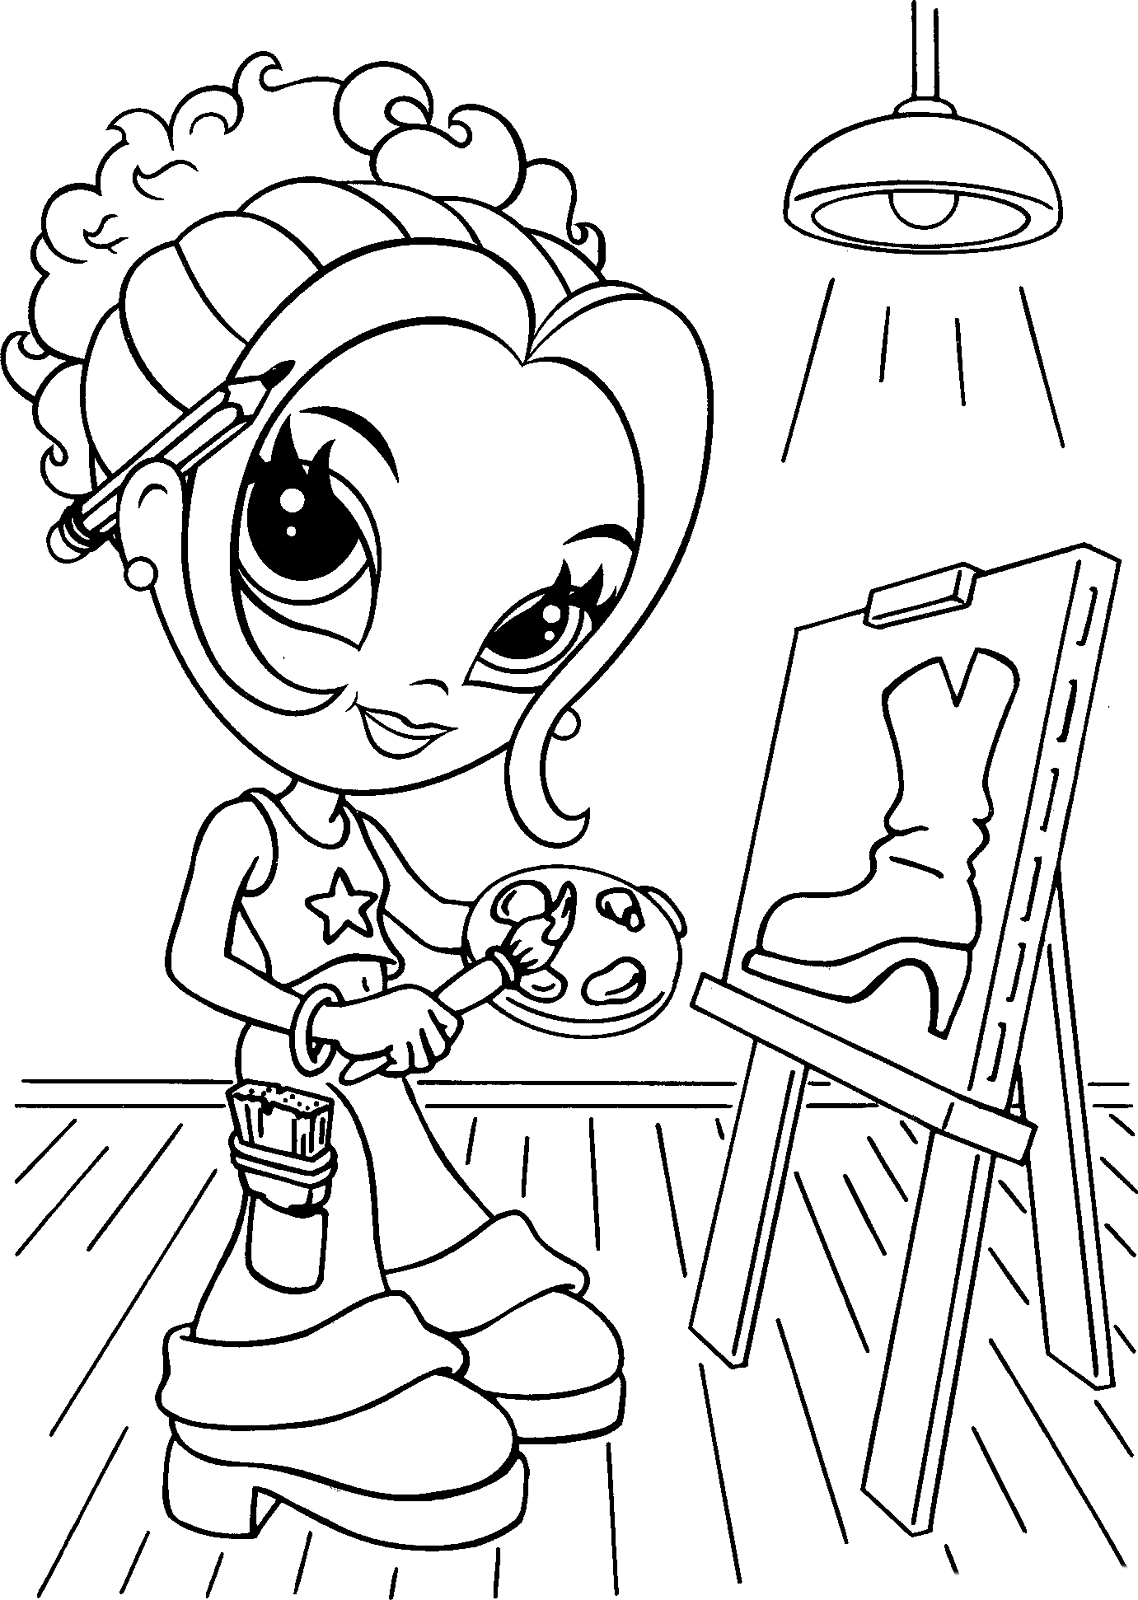 Coloring page   The girl draws